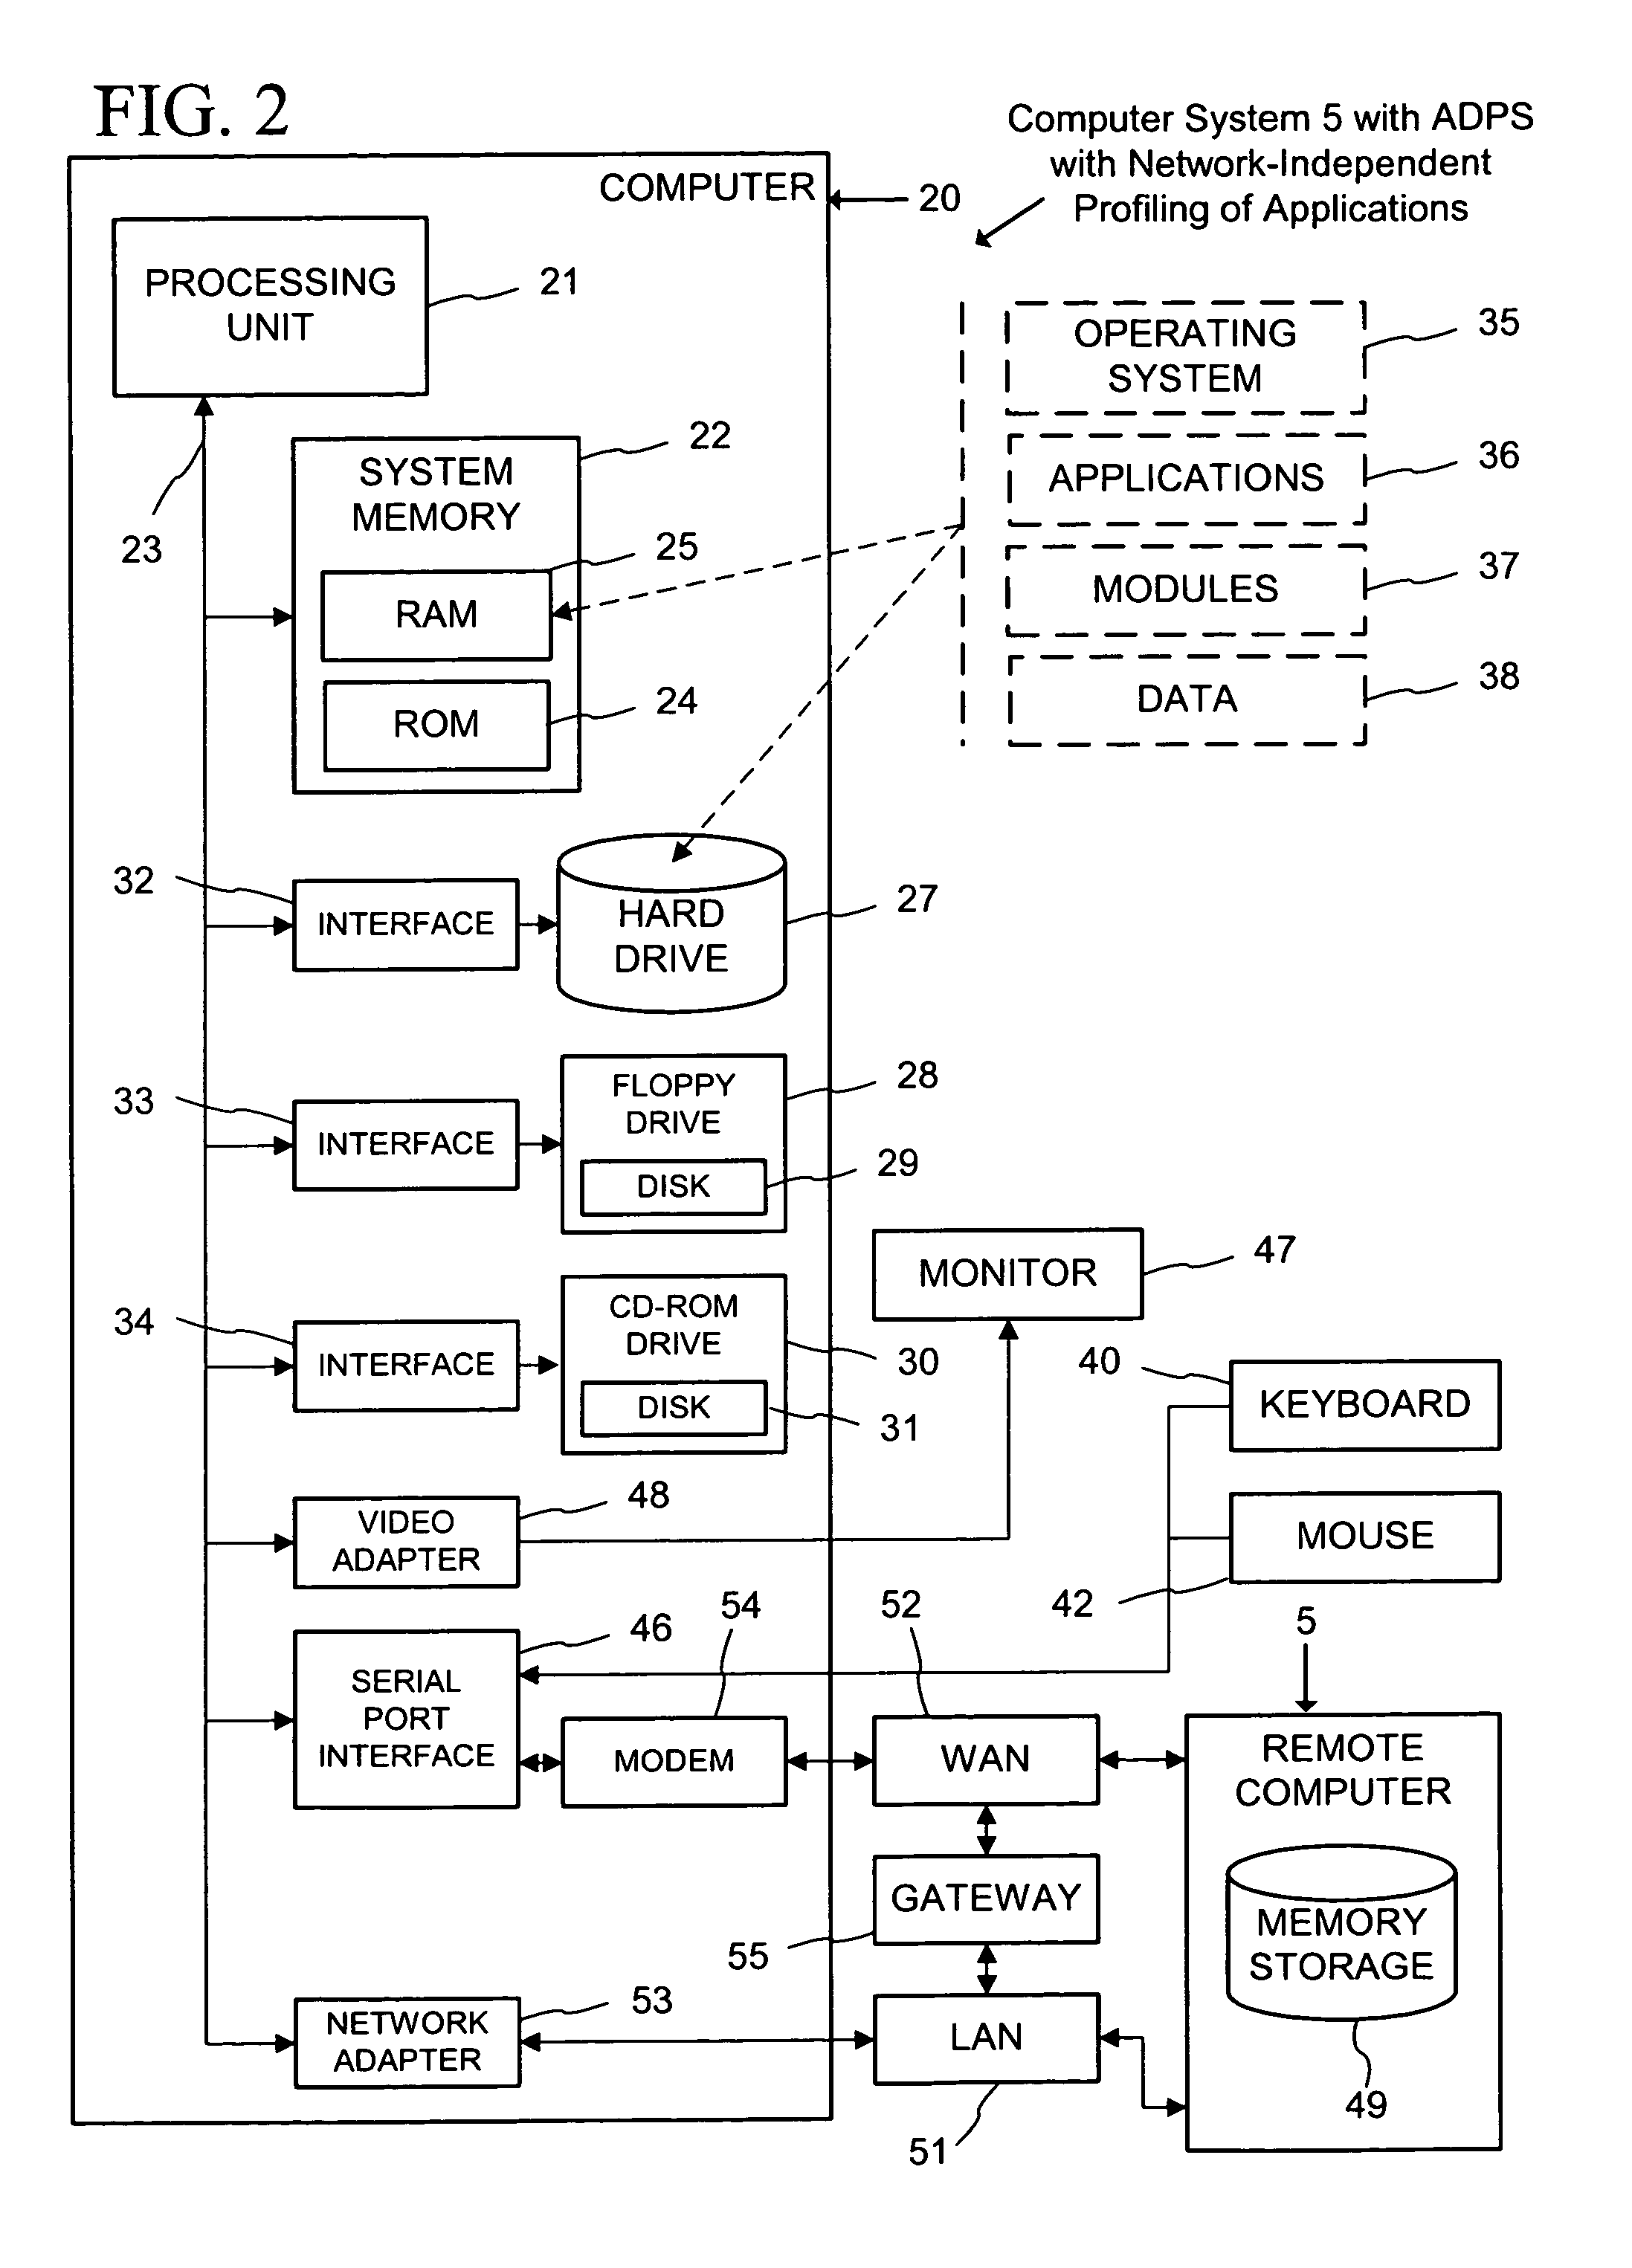 Network-independent profiling of applications for automatic partitioning and distribution in a distributed computing environment